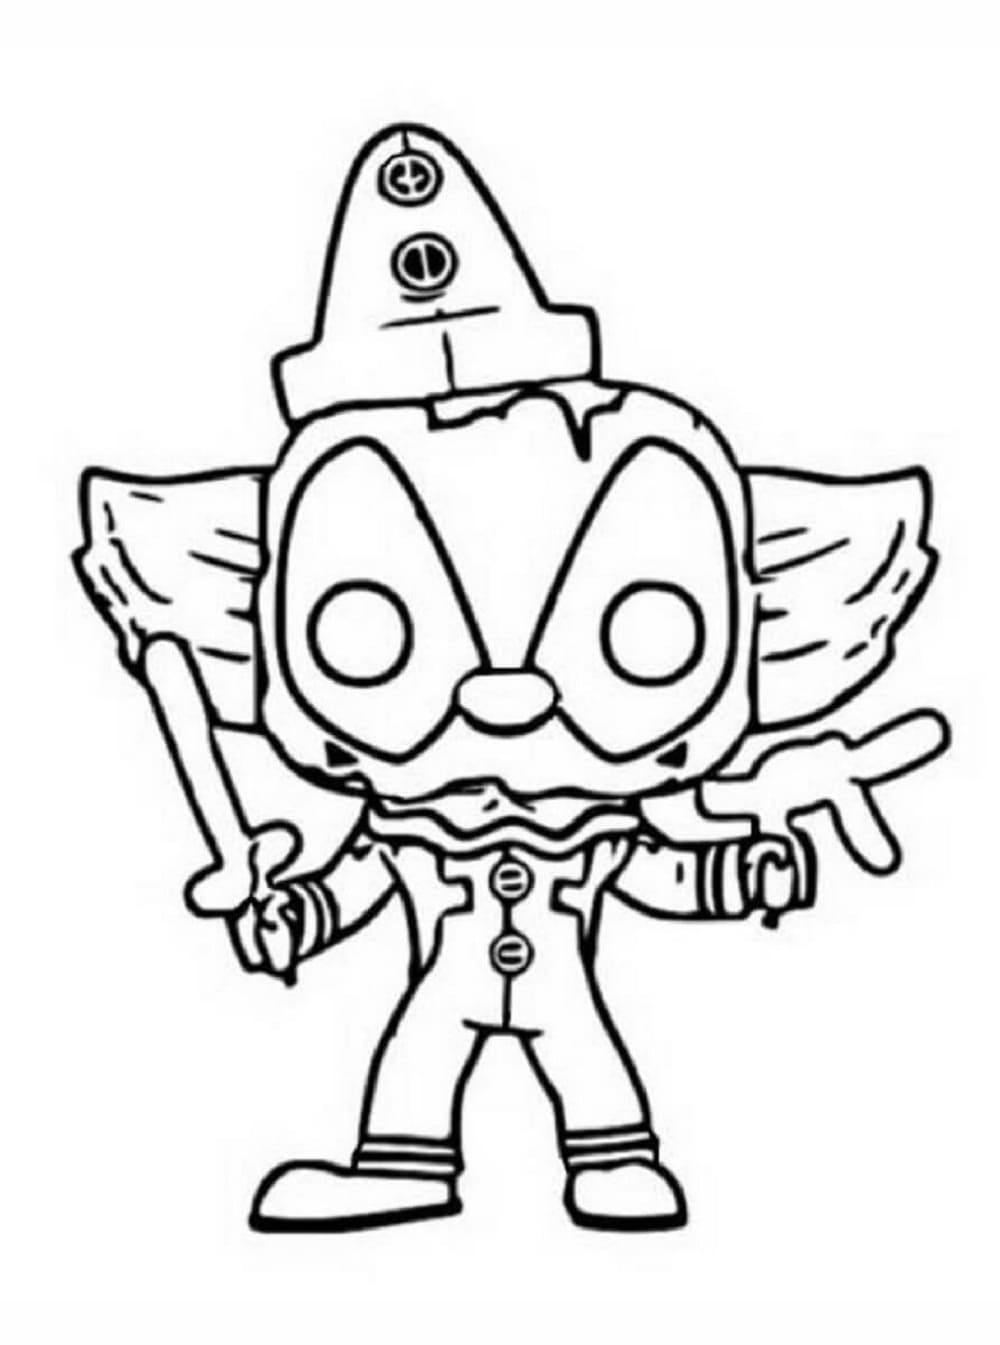 Printable Funko Pops Clown Coloring Page